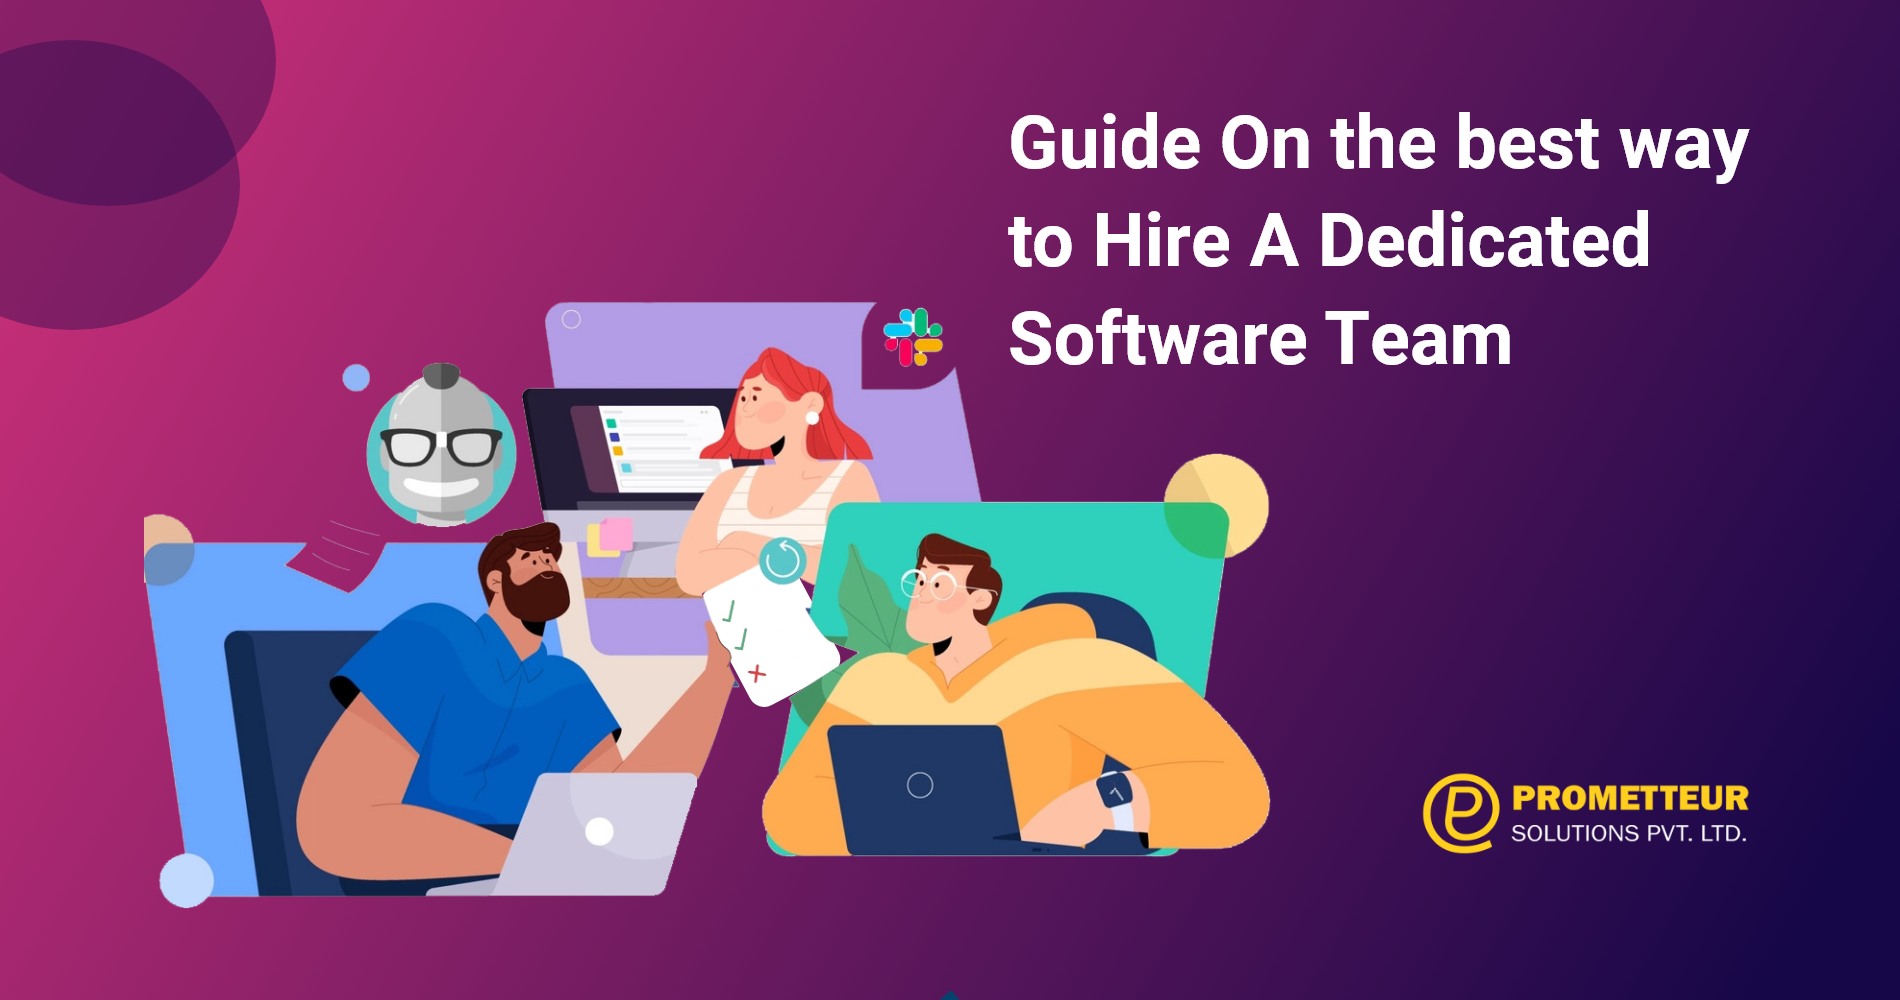 Guide On the best way to Hire A Dedicated Software Team